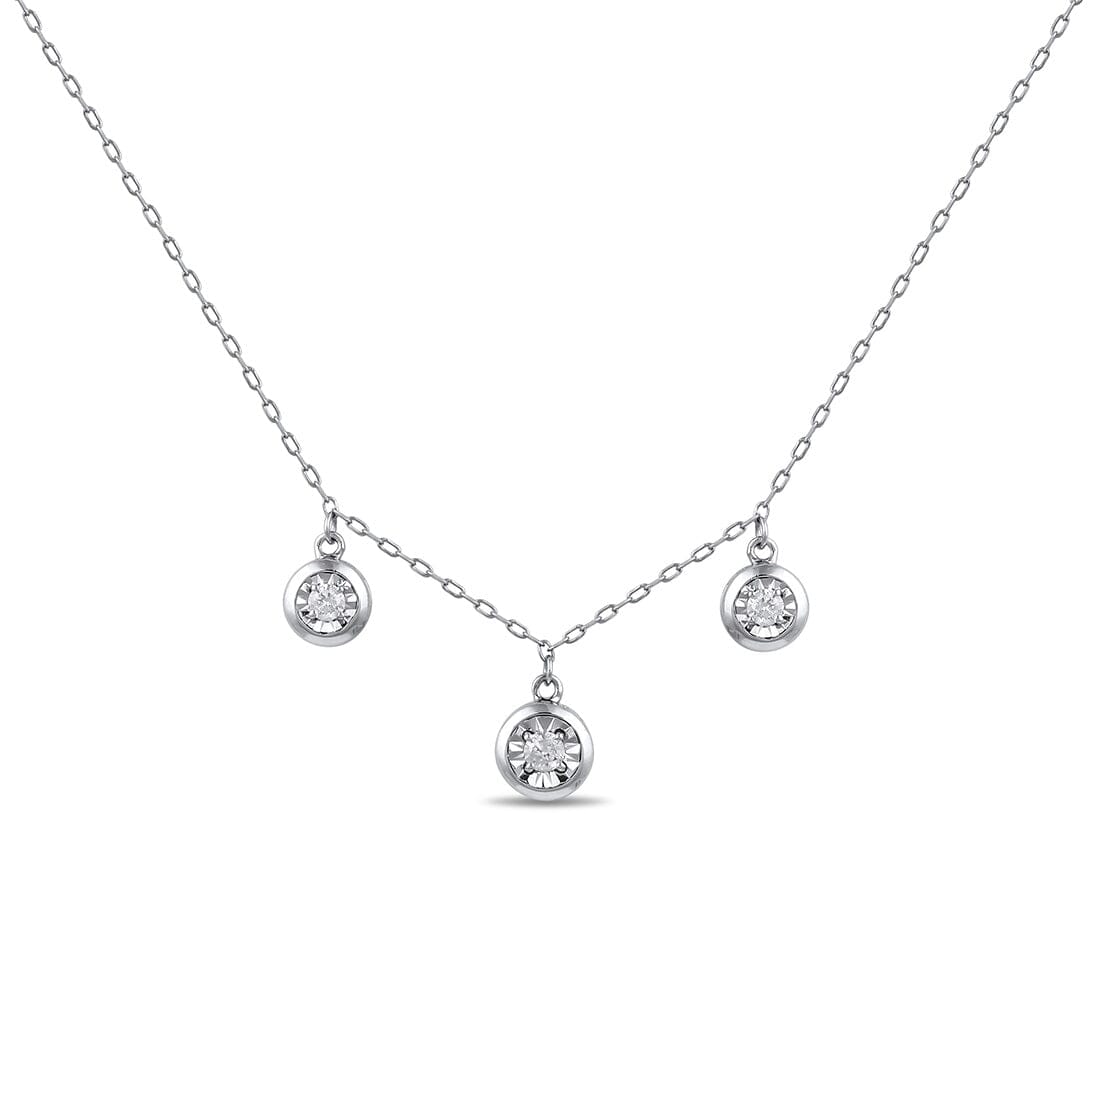 3 Station Necklace with 1/5ct of Diamonds in Sterling Silver Necklaces Bevilles 